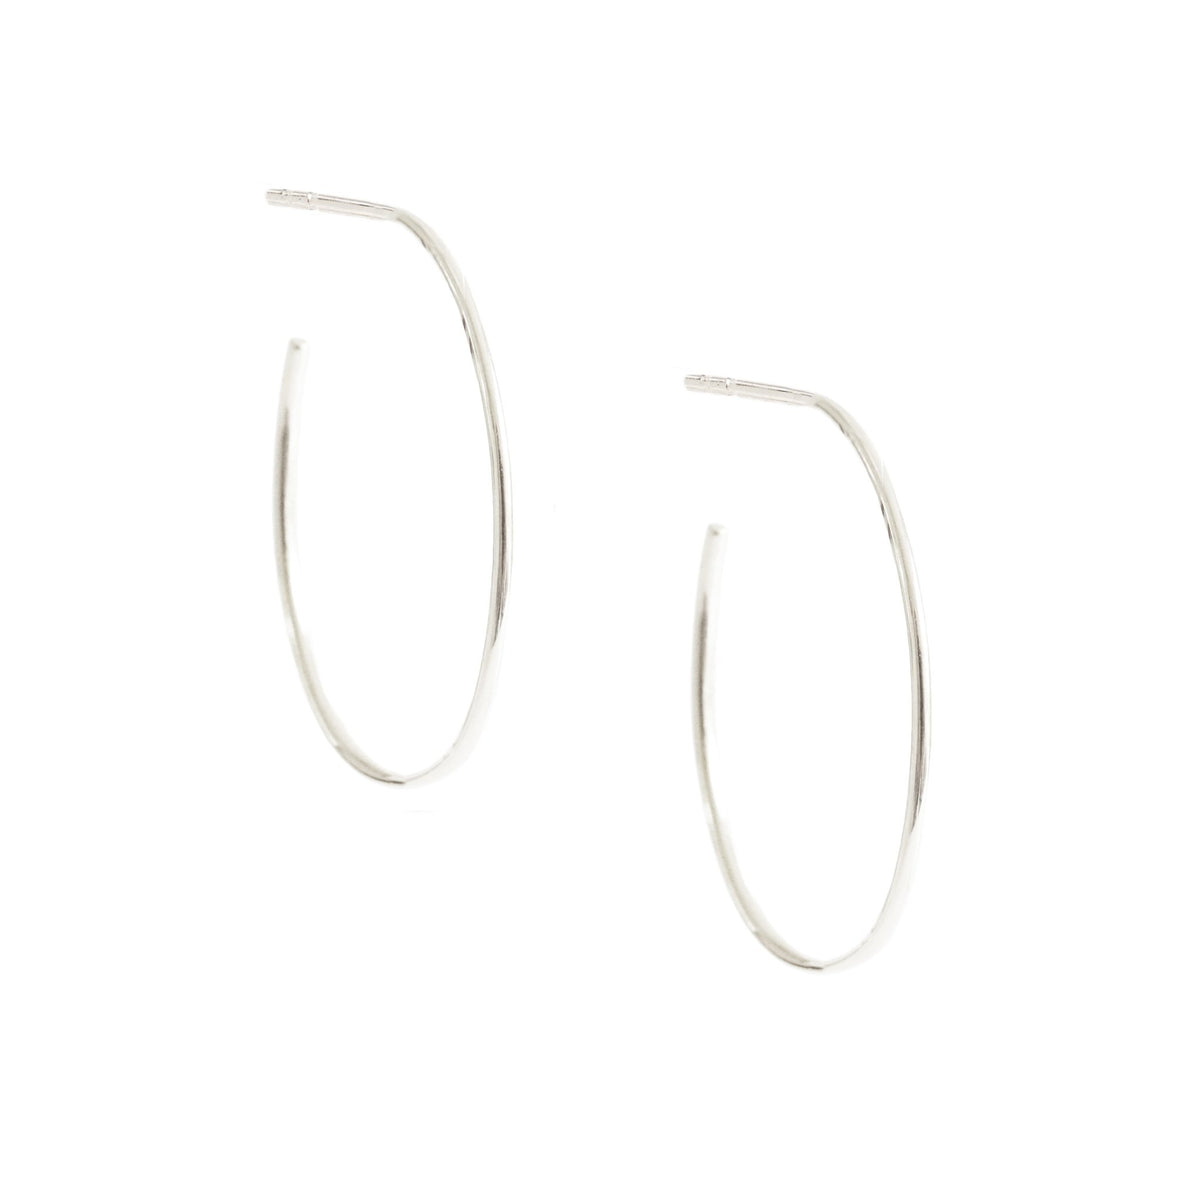 POISE HOOPS - SILVER - SO PRETTY CARA COTTER